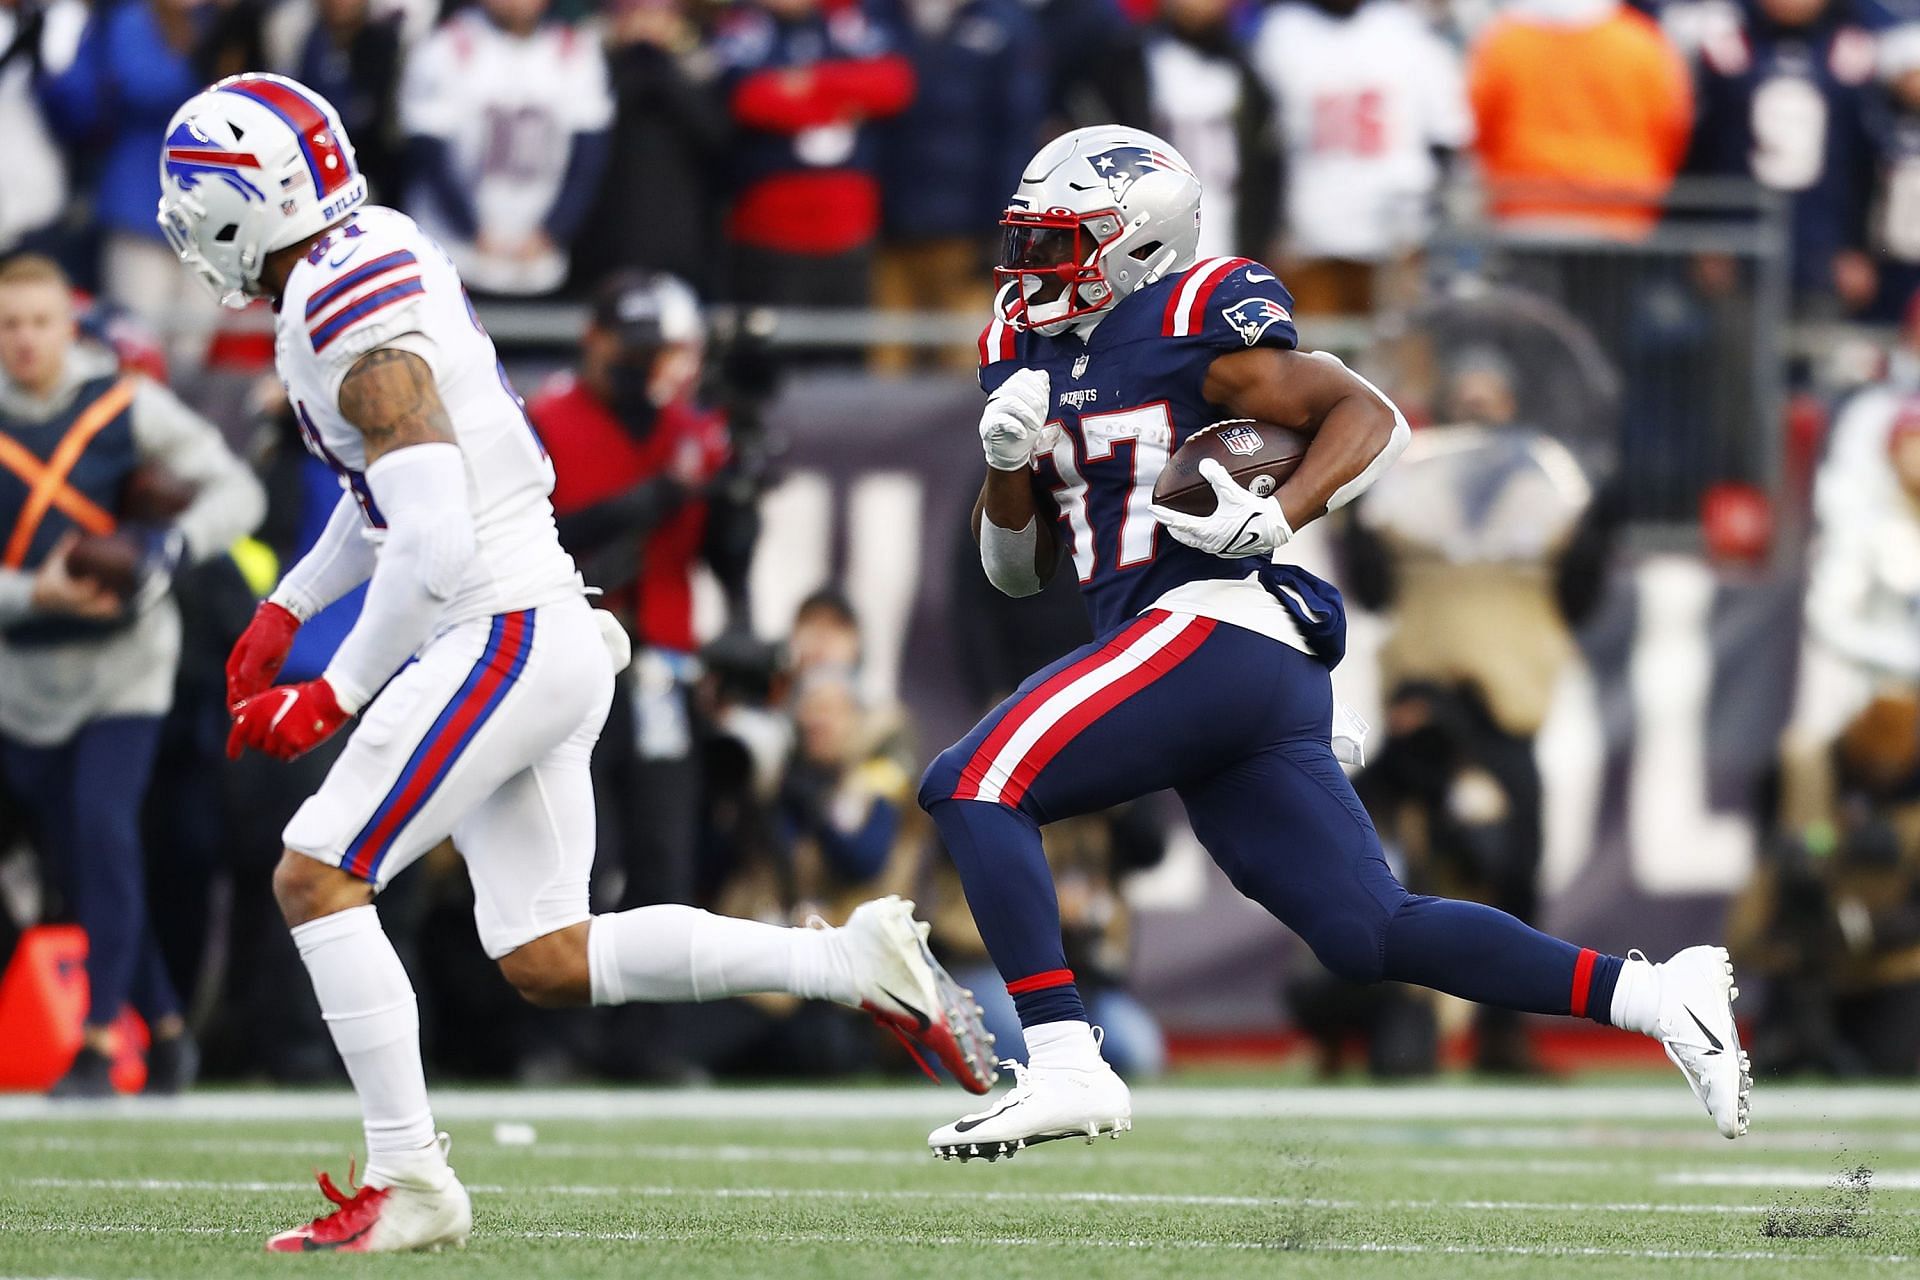 Damien Harris achnored the Patriots&#039; offense on Sunday, scoring all three of their touchdowns (Photo: Getty)